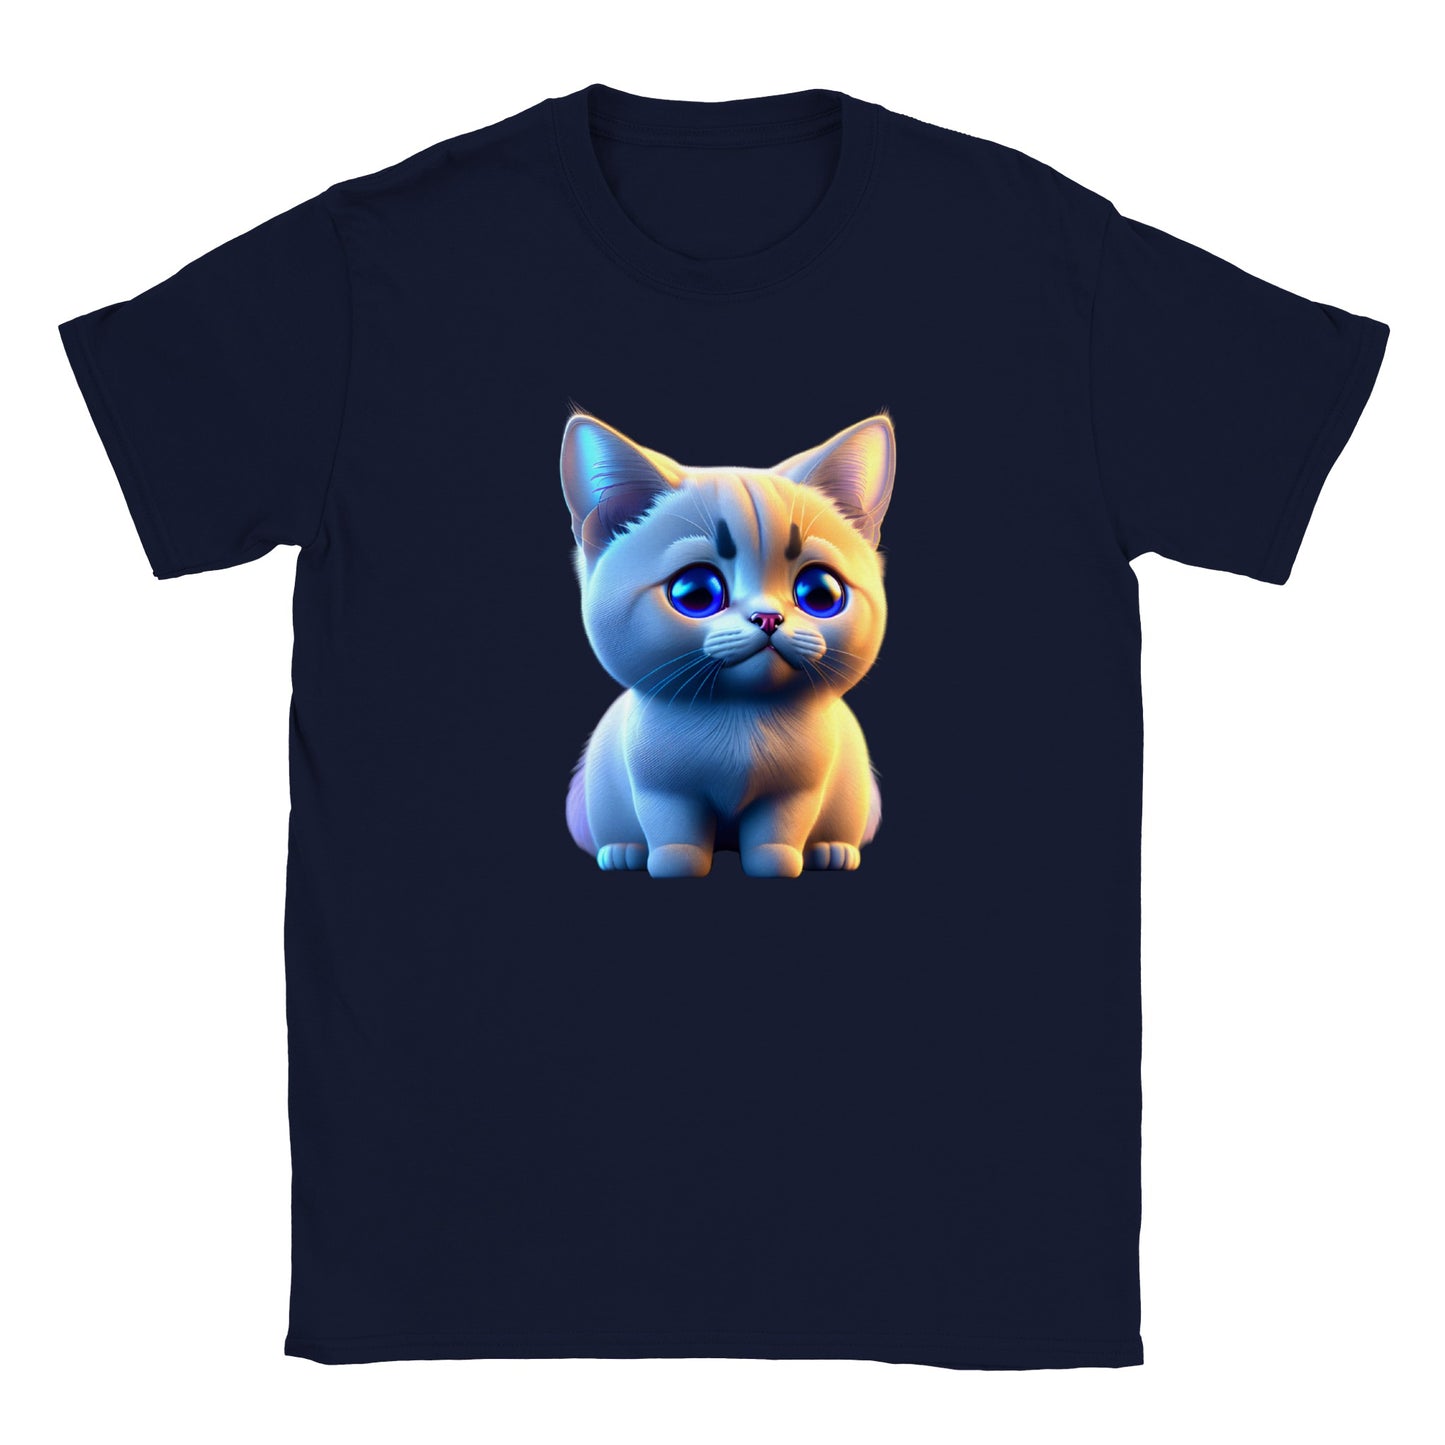 Adorable, Cool, Cute Cats and Kittens Toy - Classic Kids Crewneck T-Shirt 21